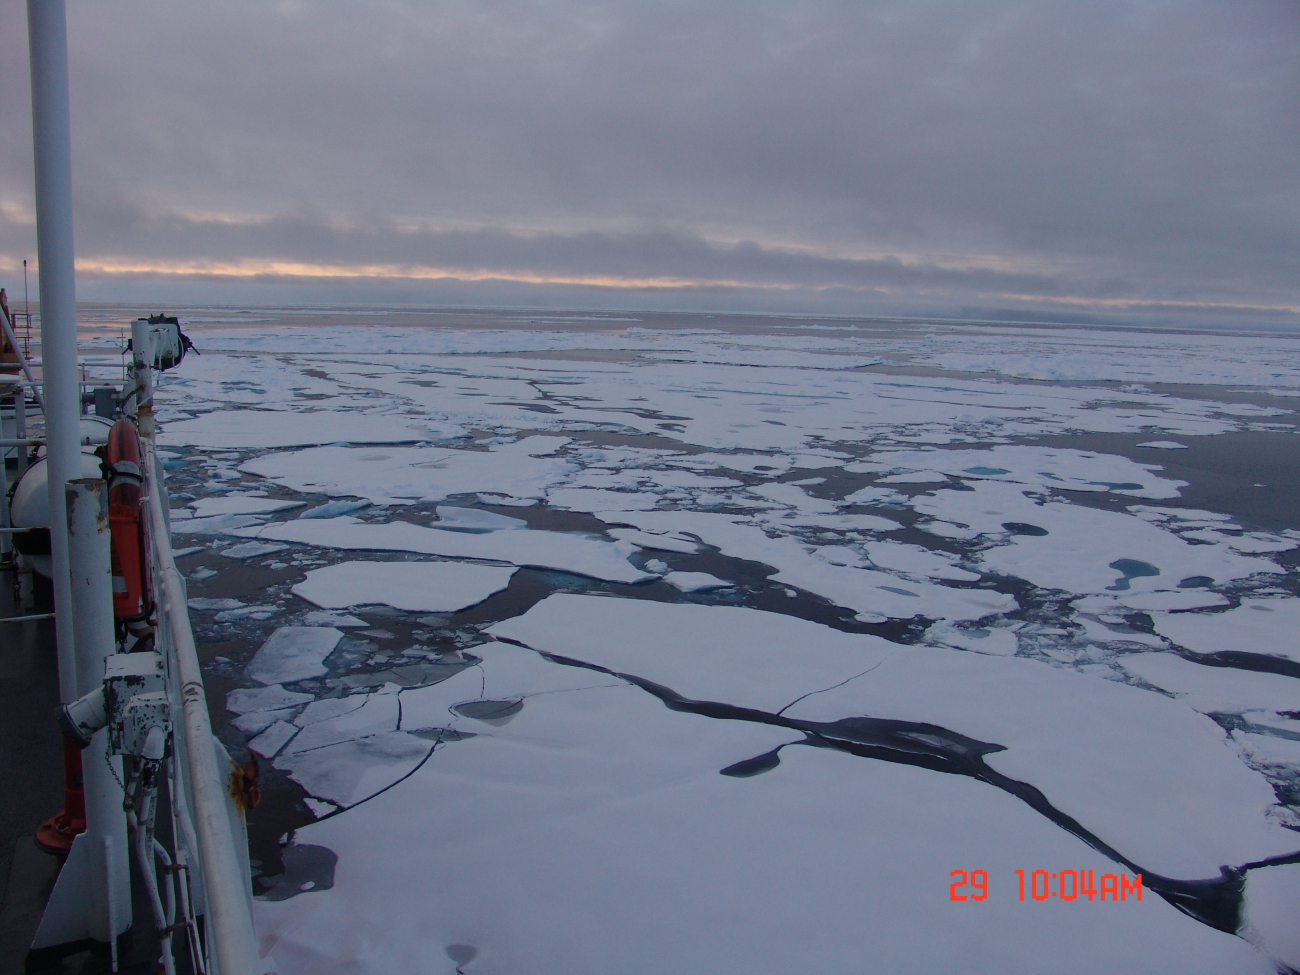 First year ice floes being relatively thin with a level surface